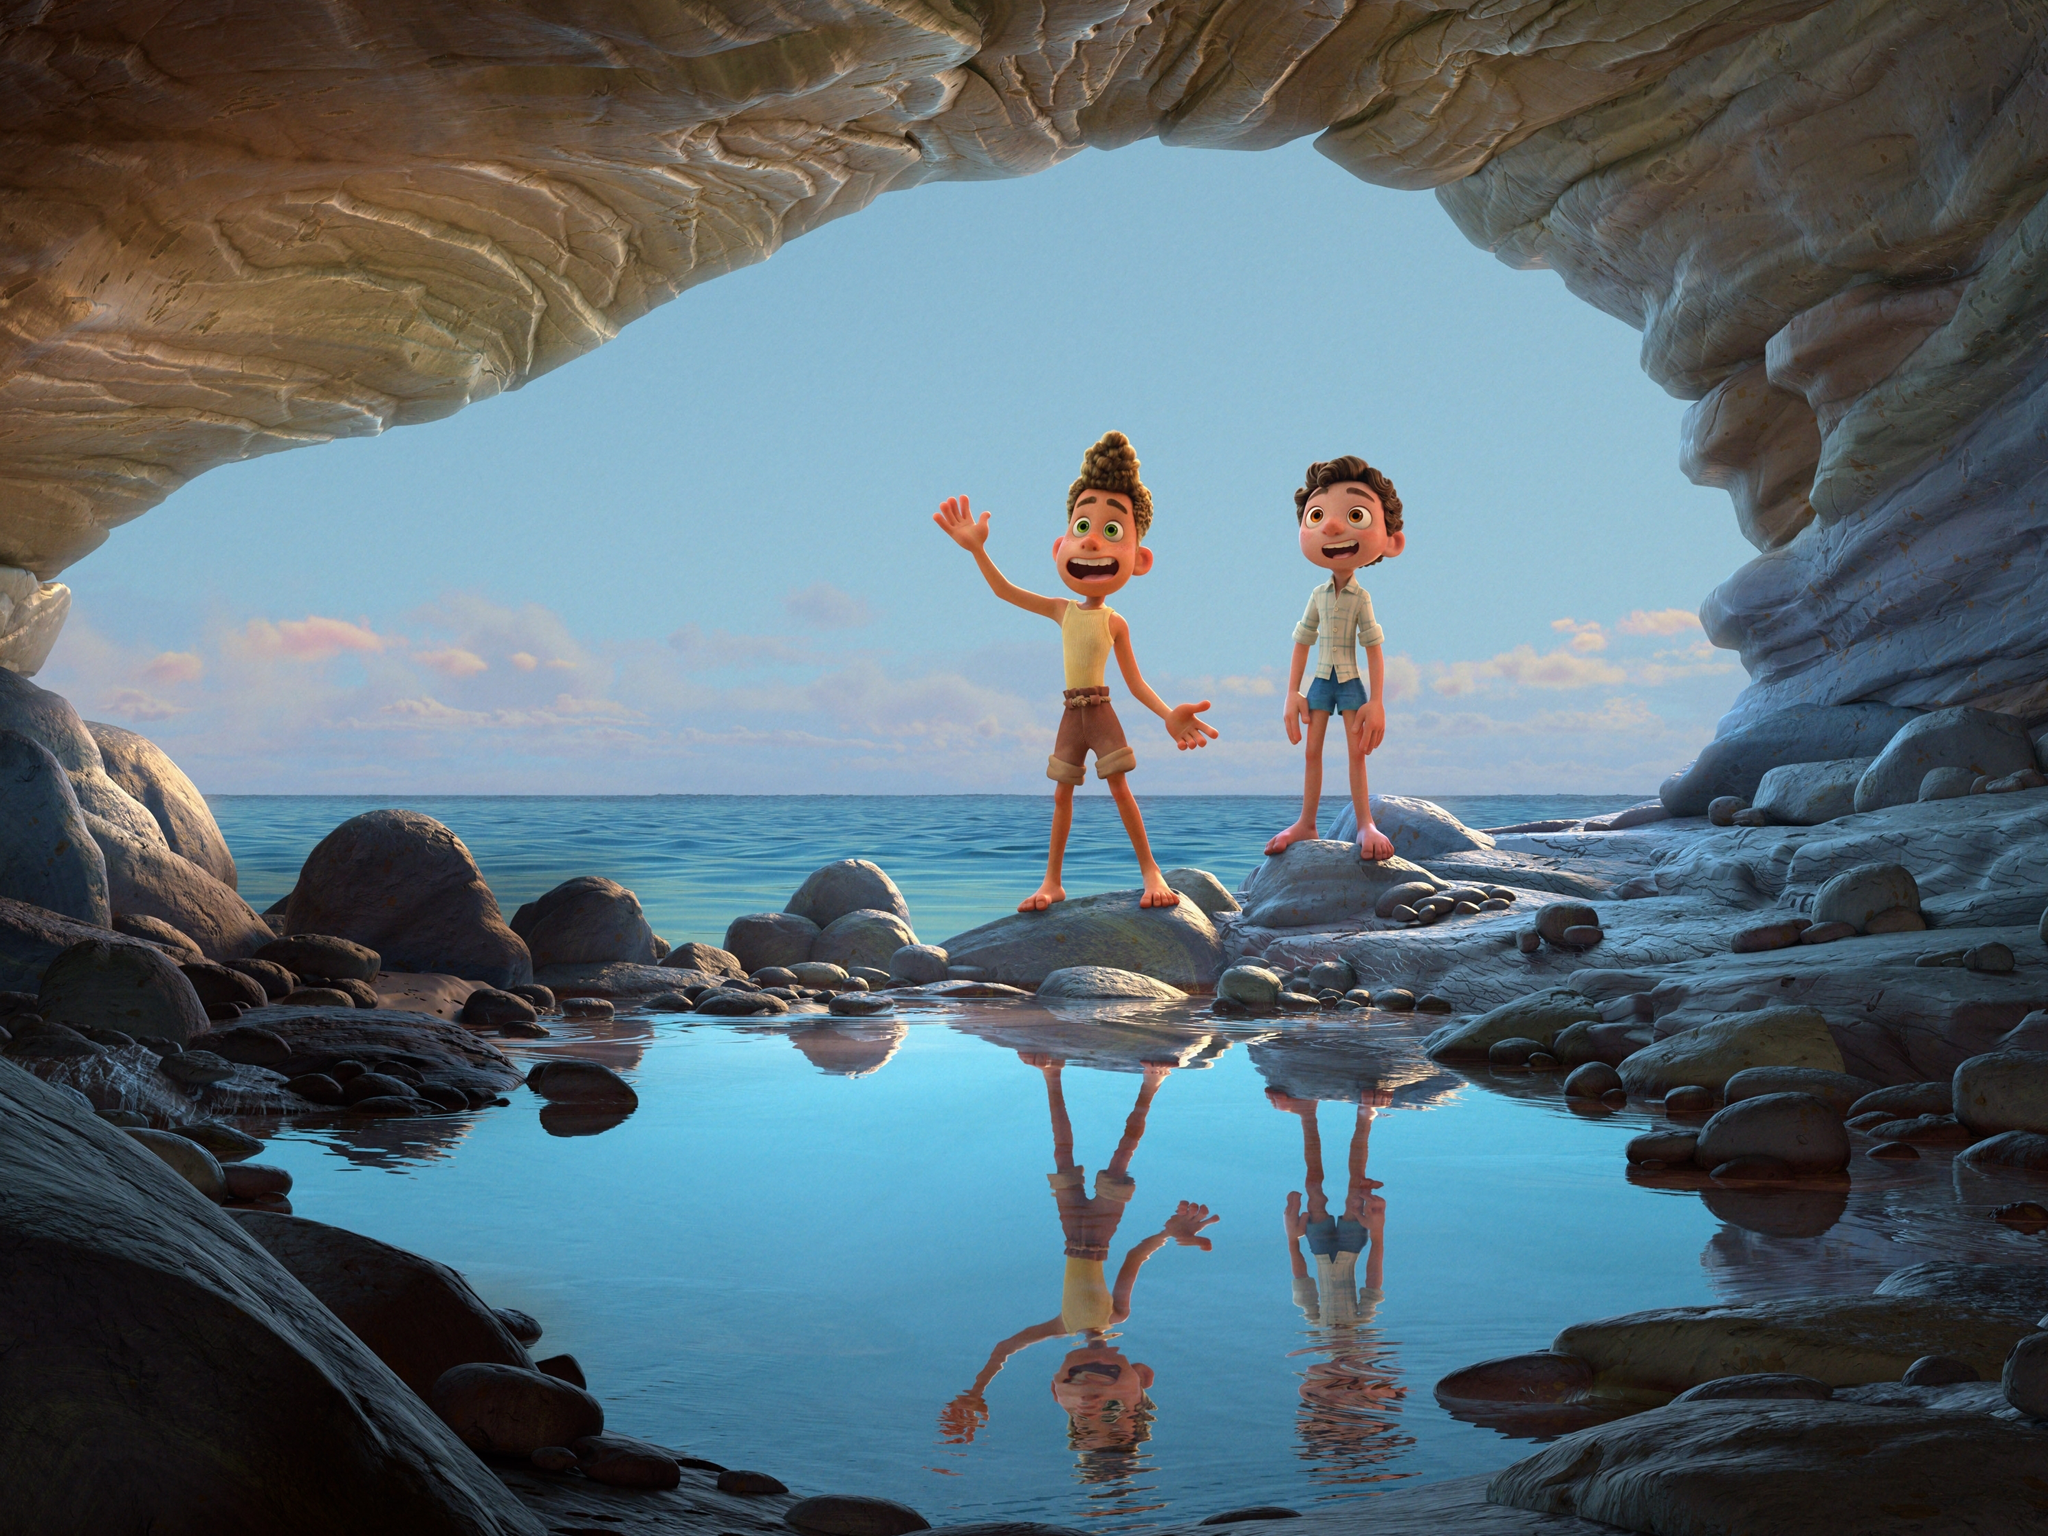 Luca, a coming-of-age story about a boy sharing summer adventures with a newfound best friend